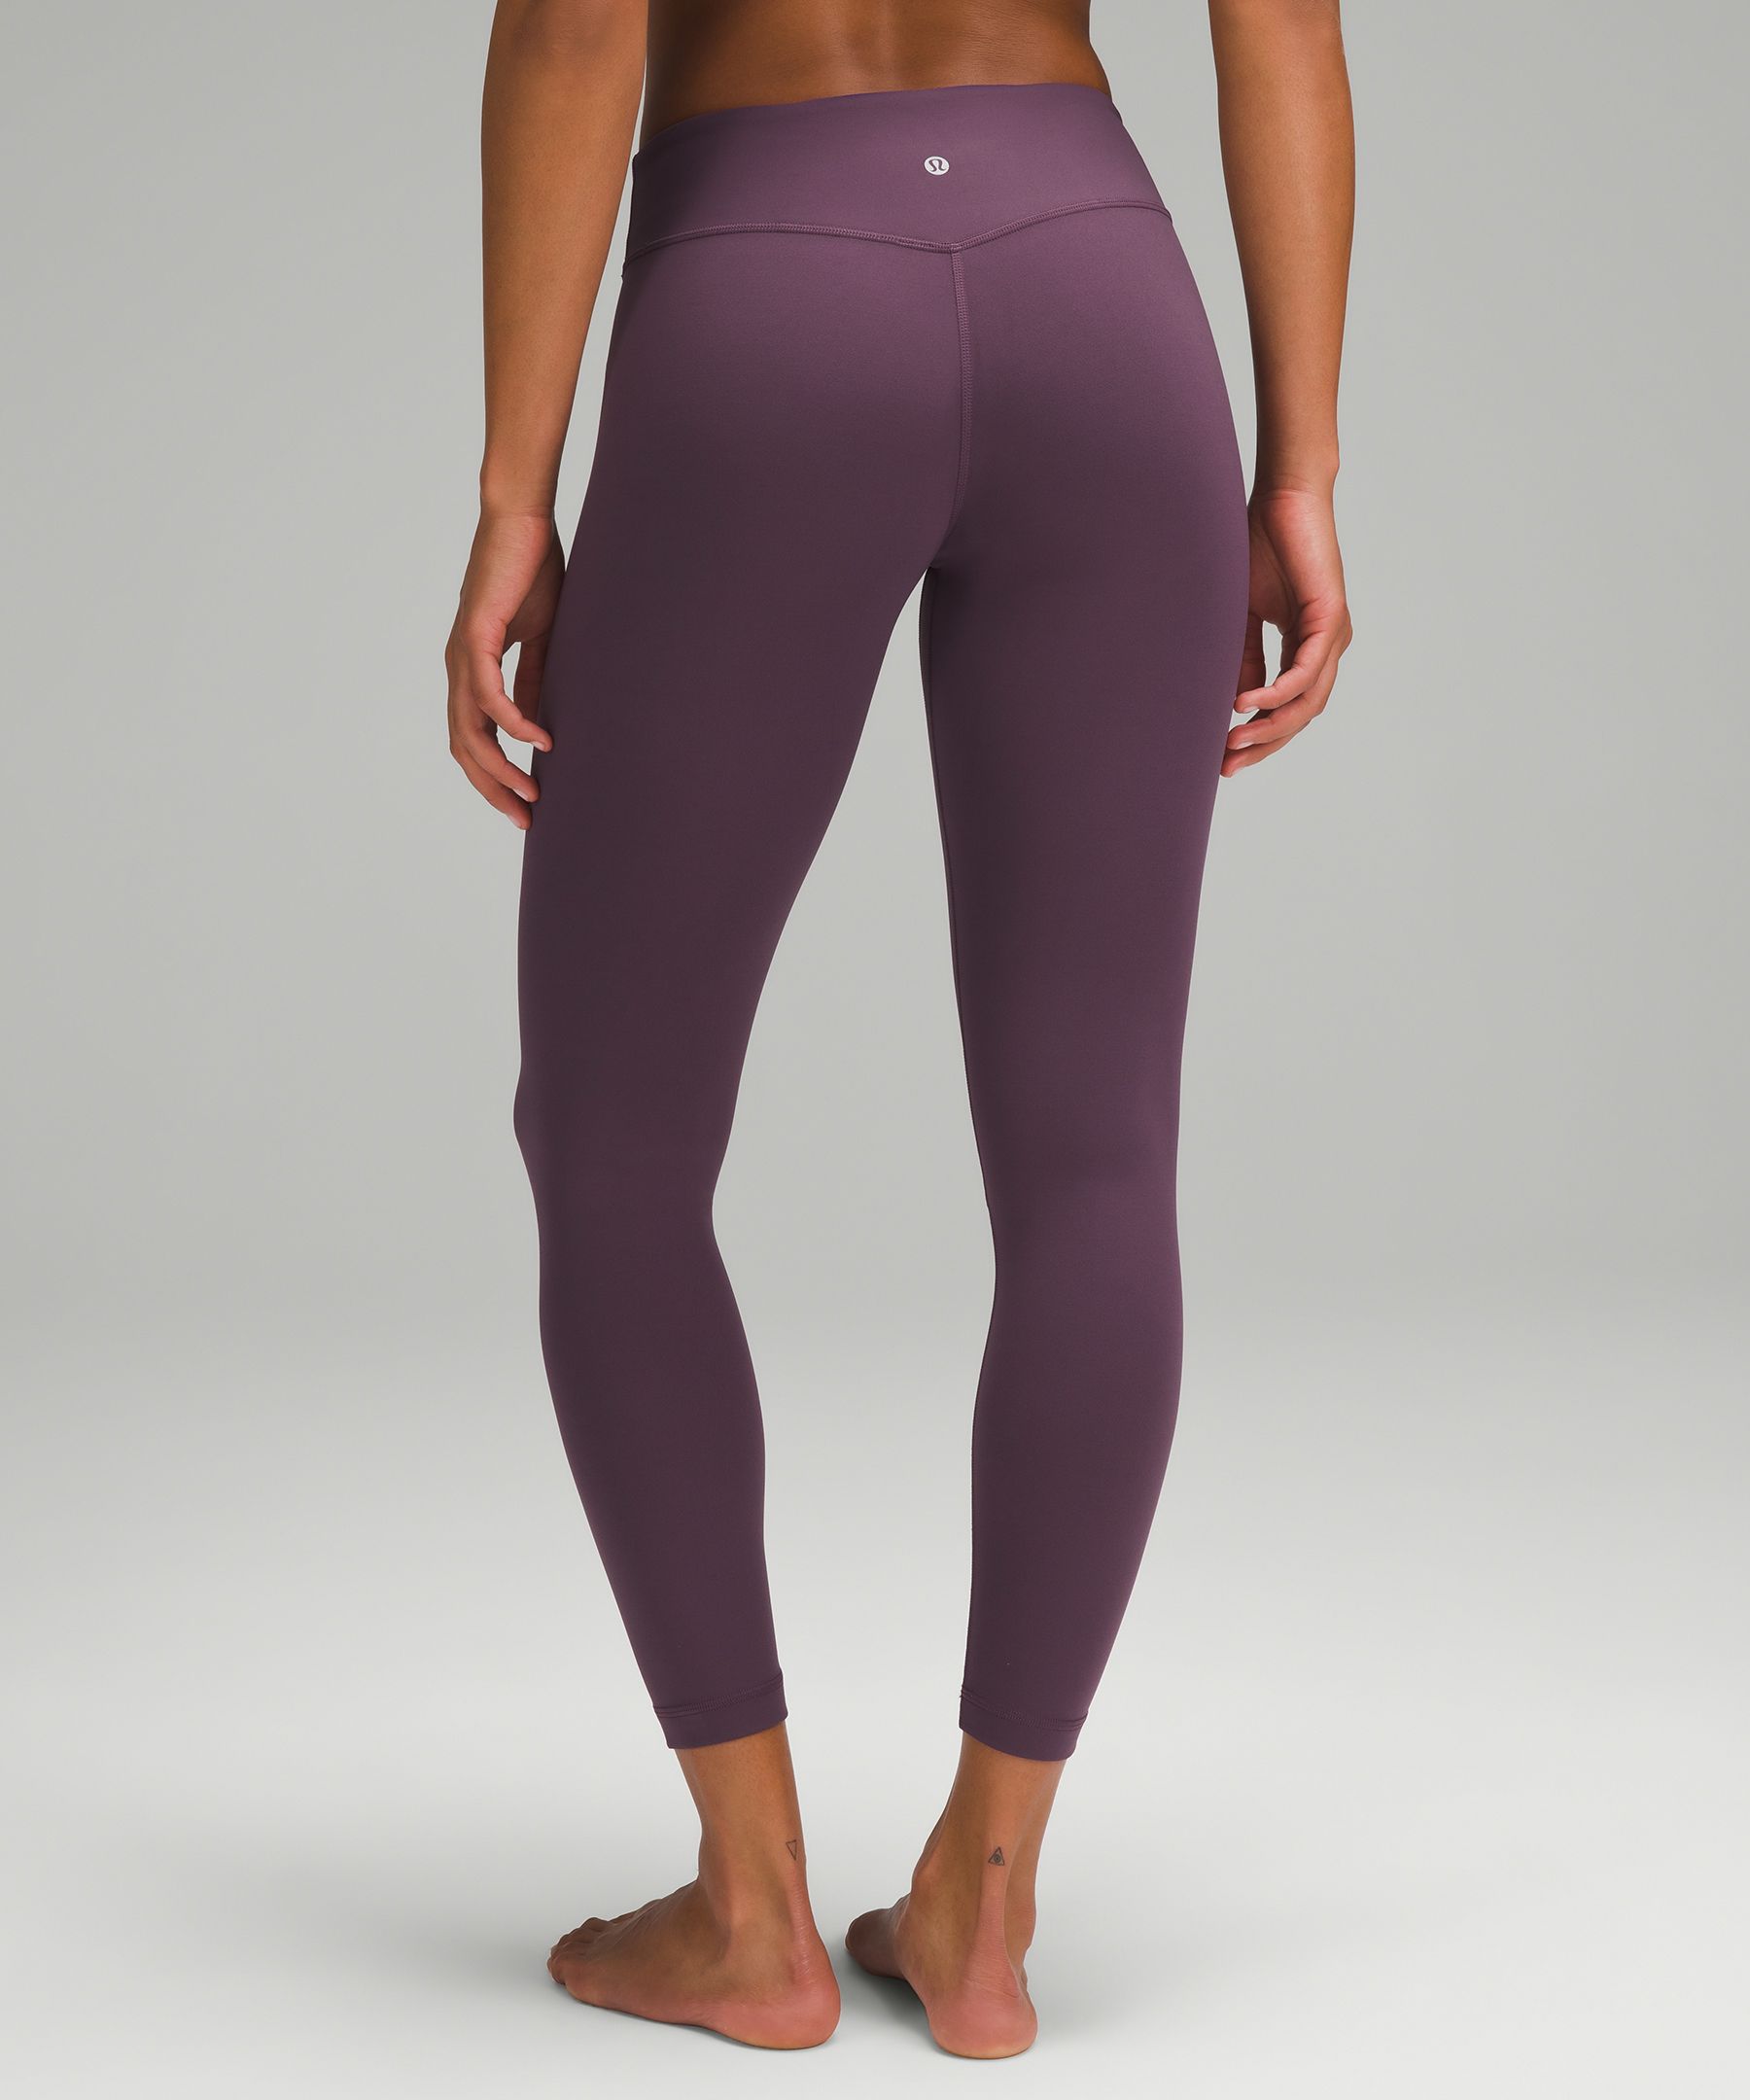 Run out and buy the lululemon Align™ Low-Rise Flared Pant! I got the c, lululemon